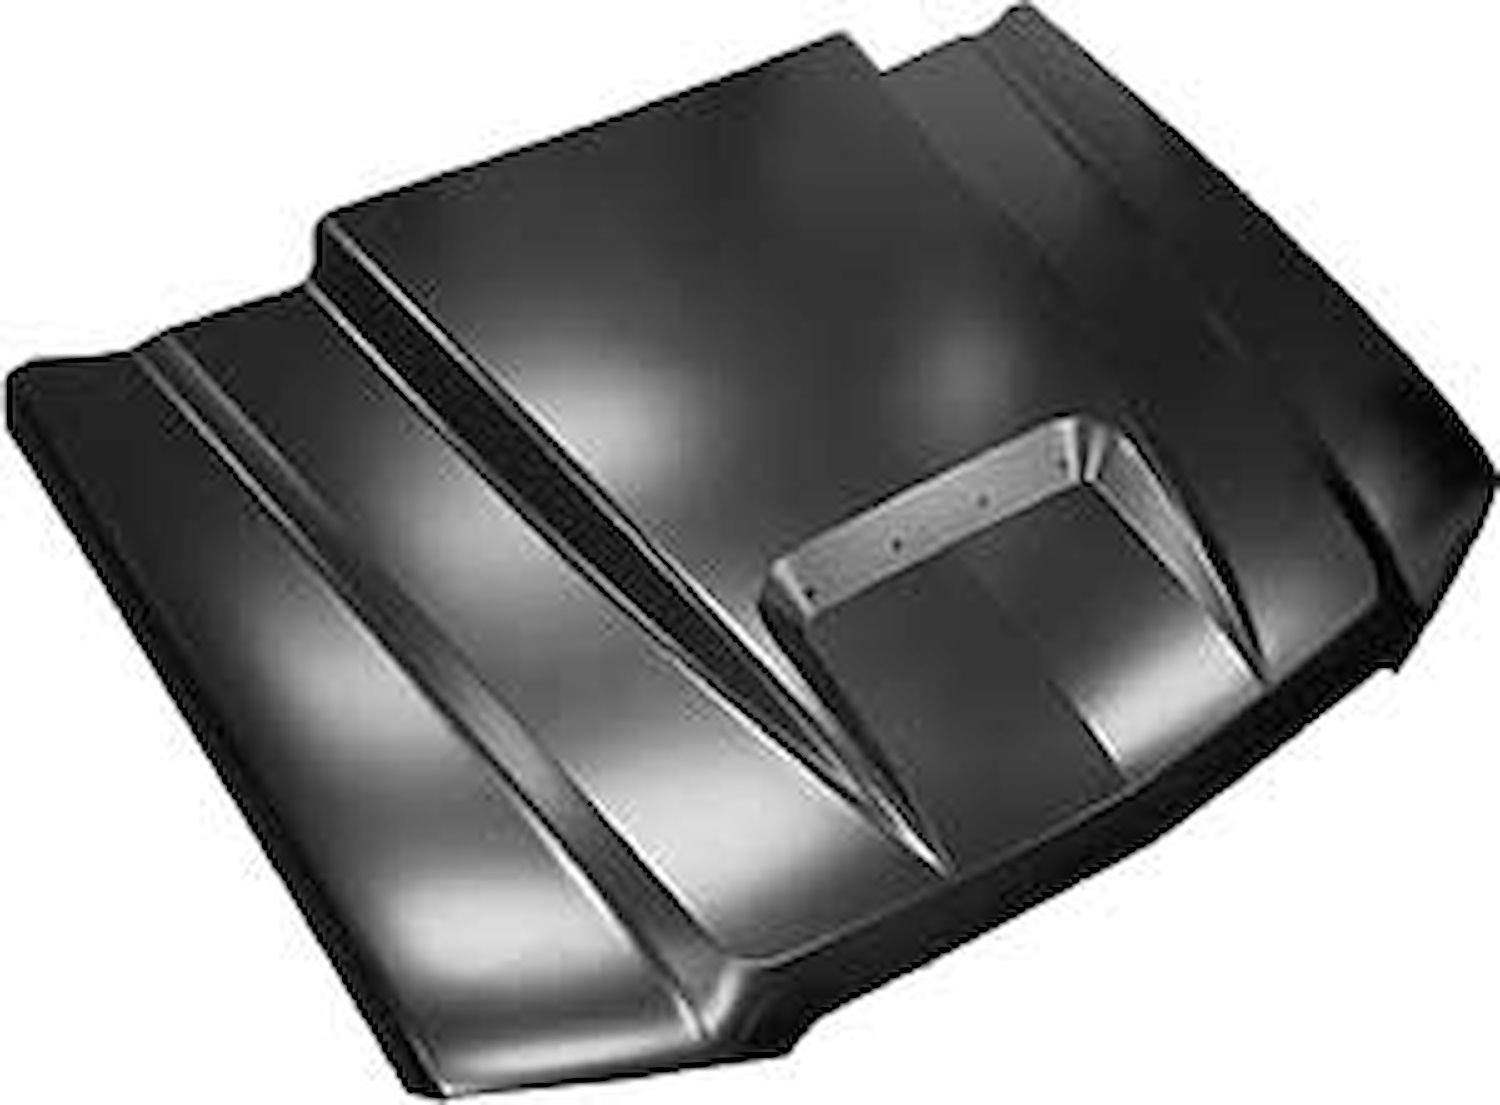 0856-043 Ram Air Style Hood for 2003-2005 Chevy Silverado 1500, 2003-2006 Chevy Avalanche [2 in.]